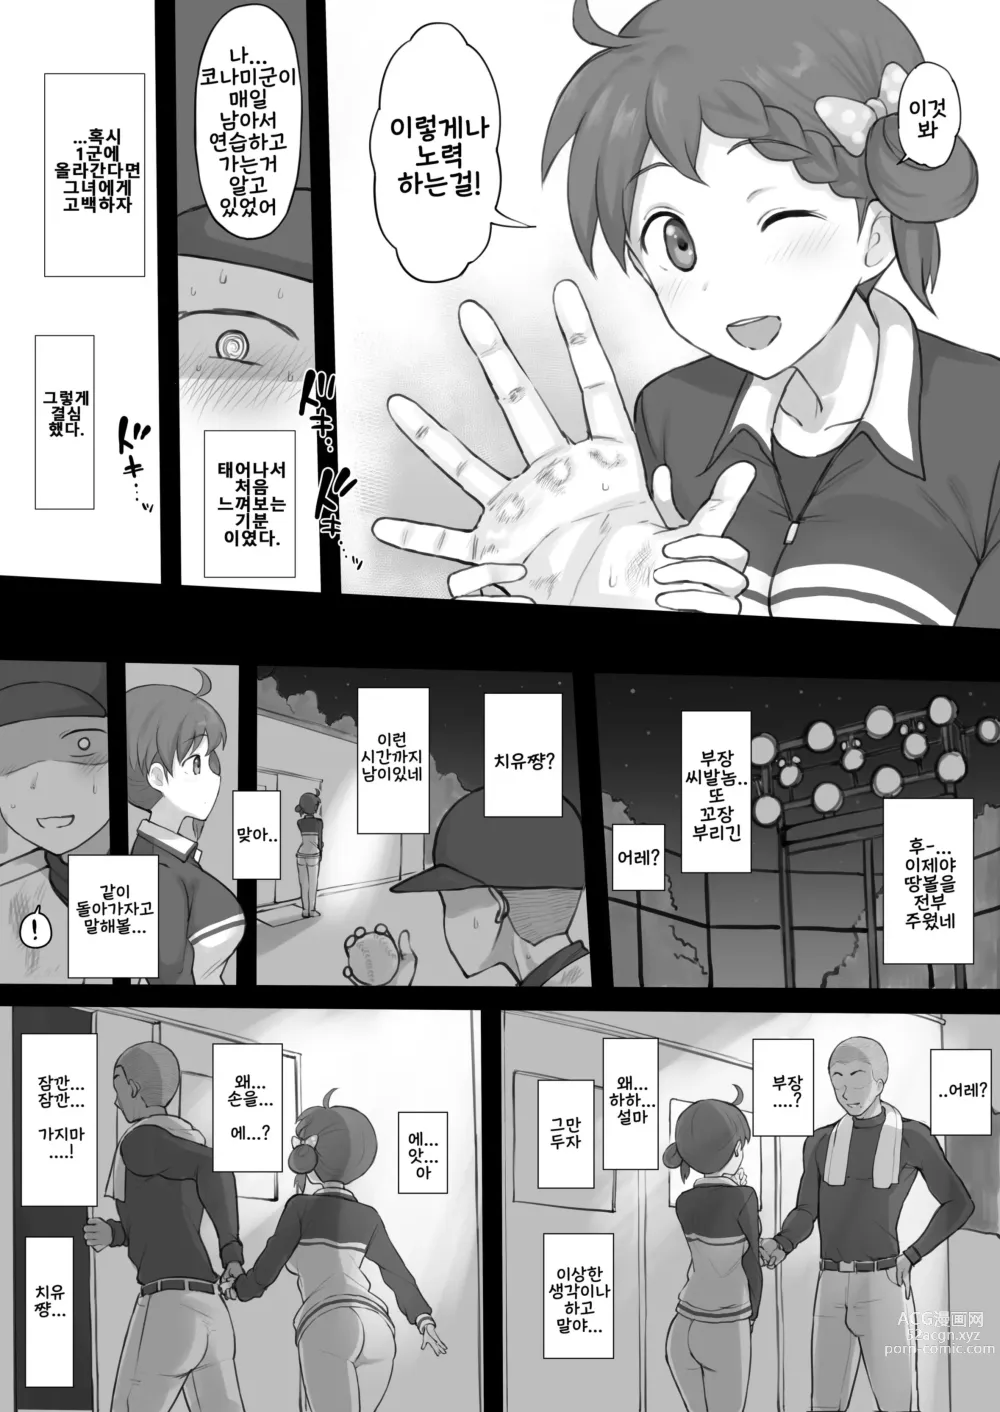 Page 5 of doujinshi Untitled BSS Comics (decensored)